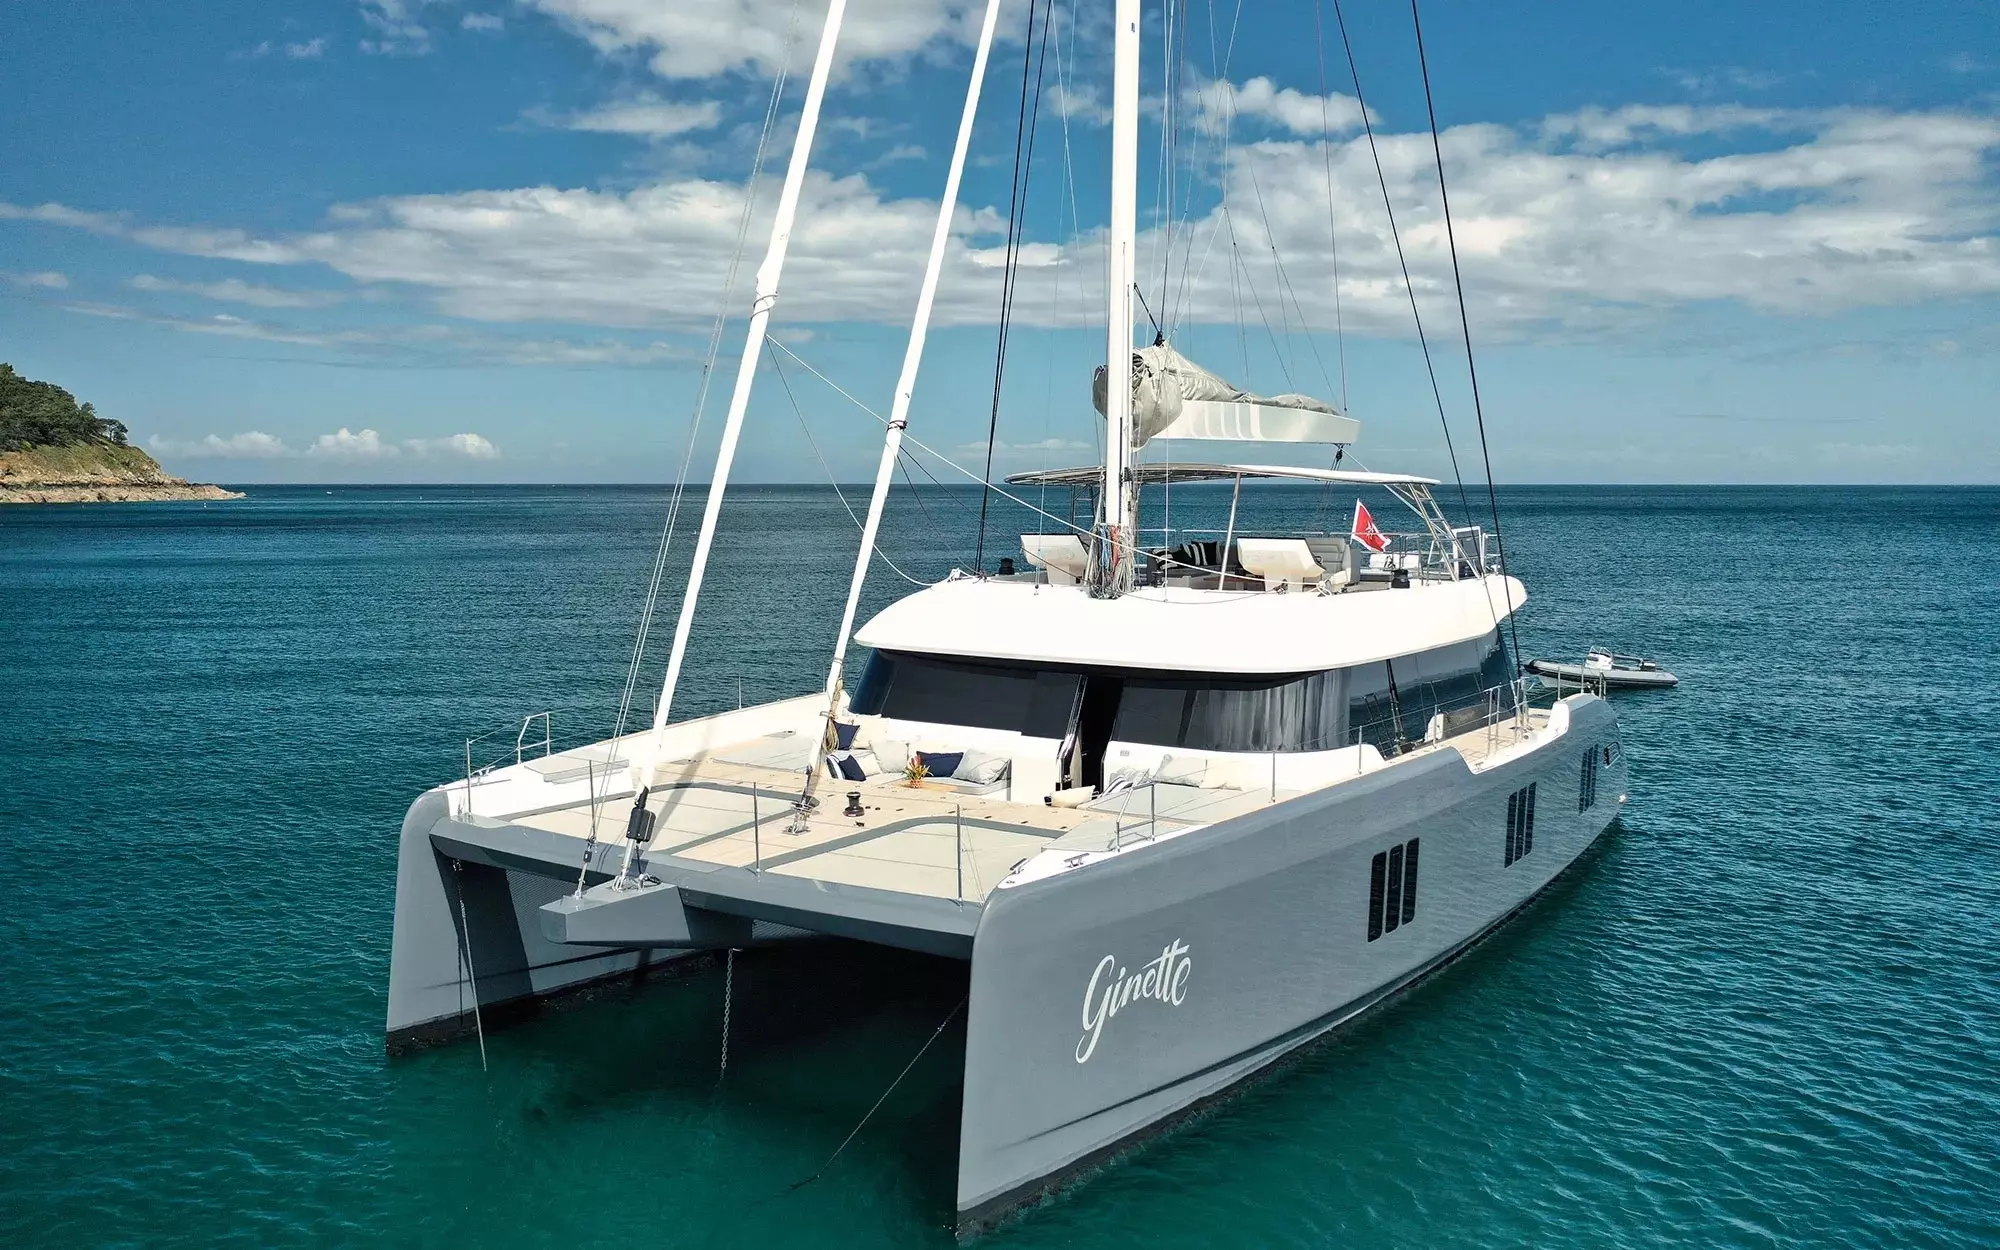 Ginette by Sunreef Yachts - Special Offer for a private Luxury Catamaran Charter in Perth with a crew